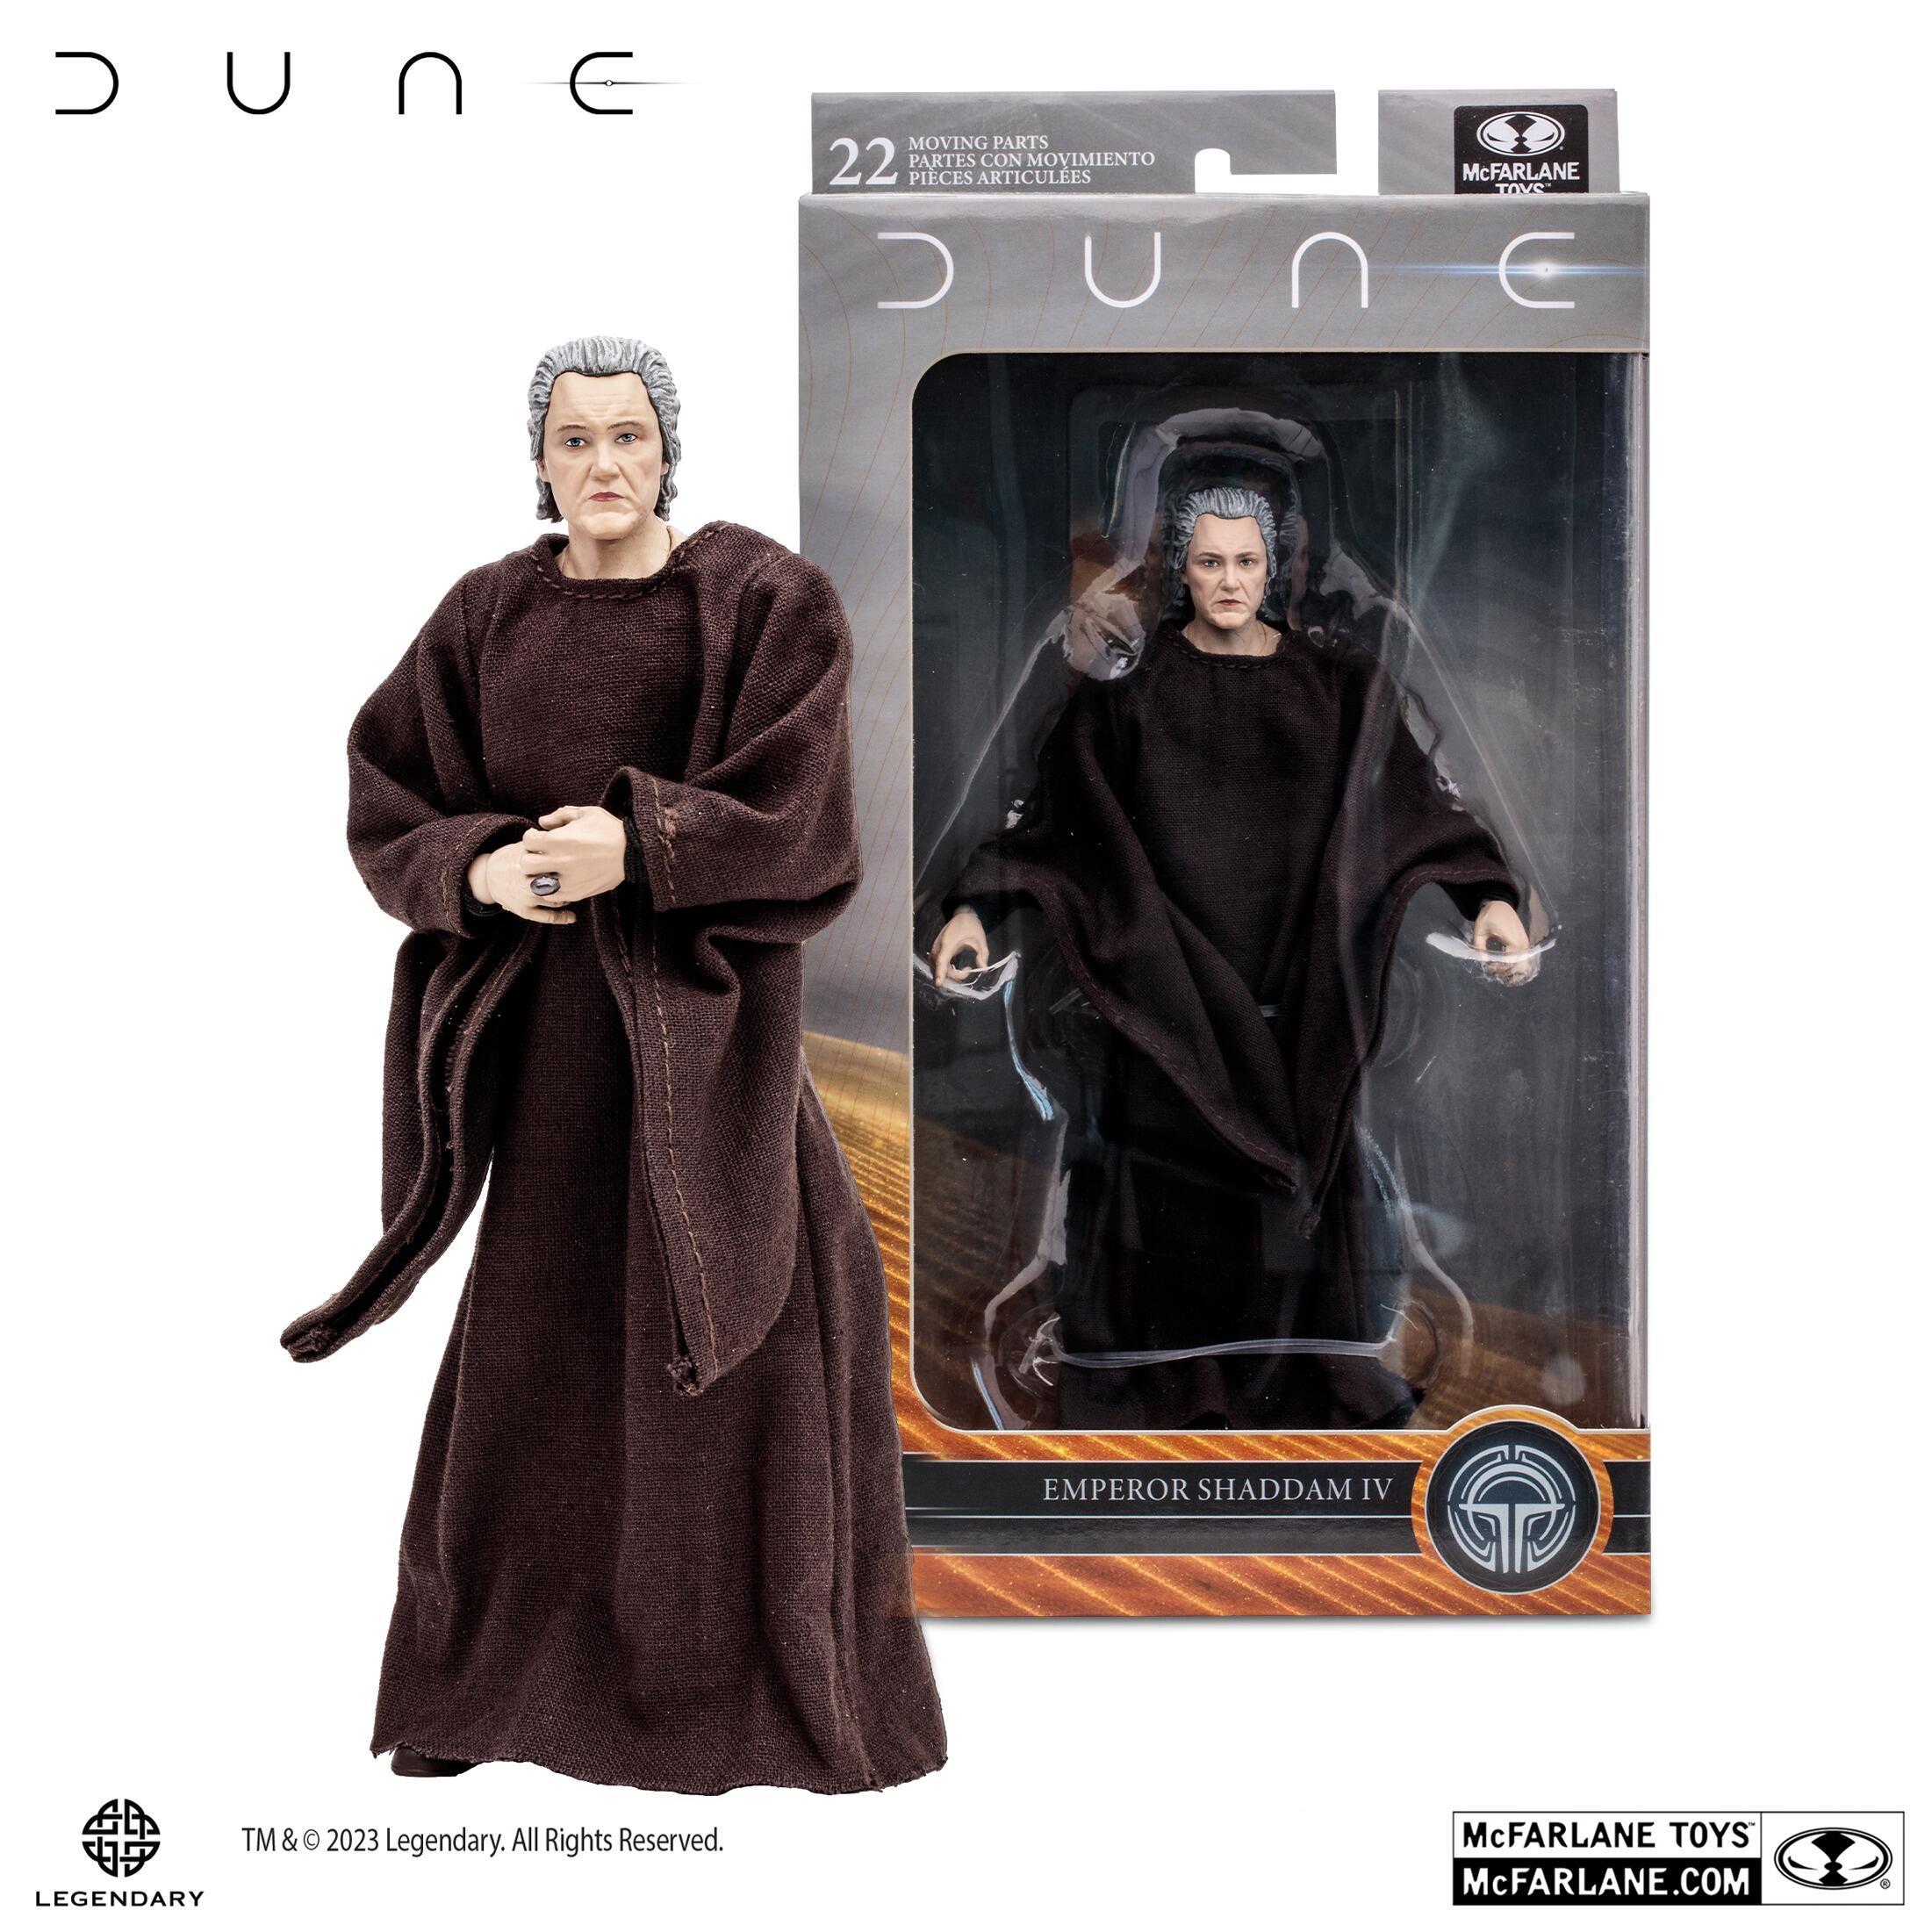 Dune: Part 2 Movie 7 Inch Scale Action Figure - Emperor Shaddam IV